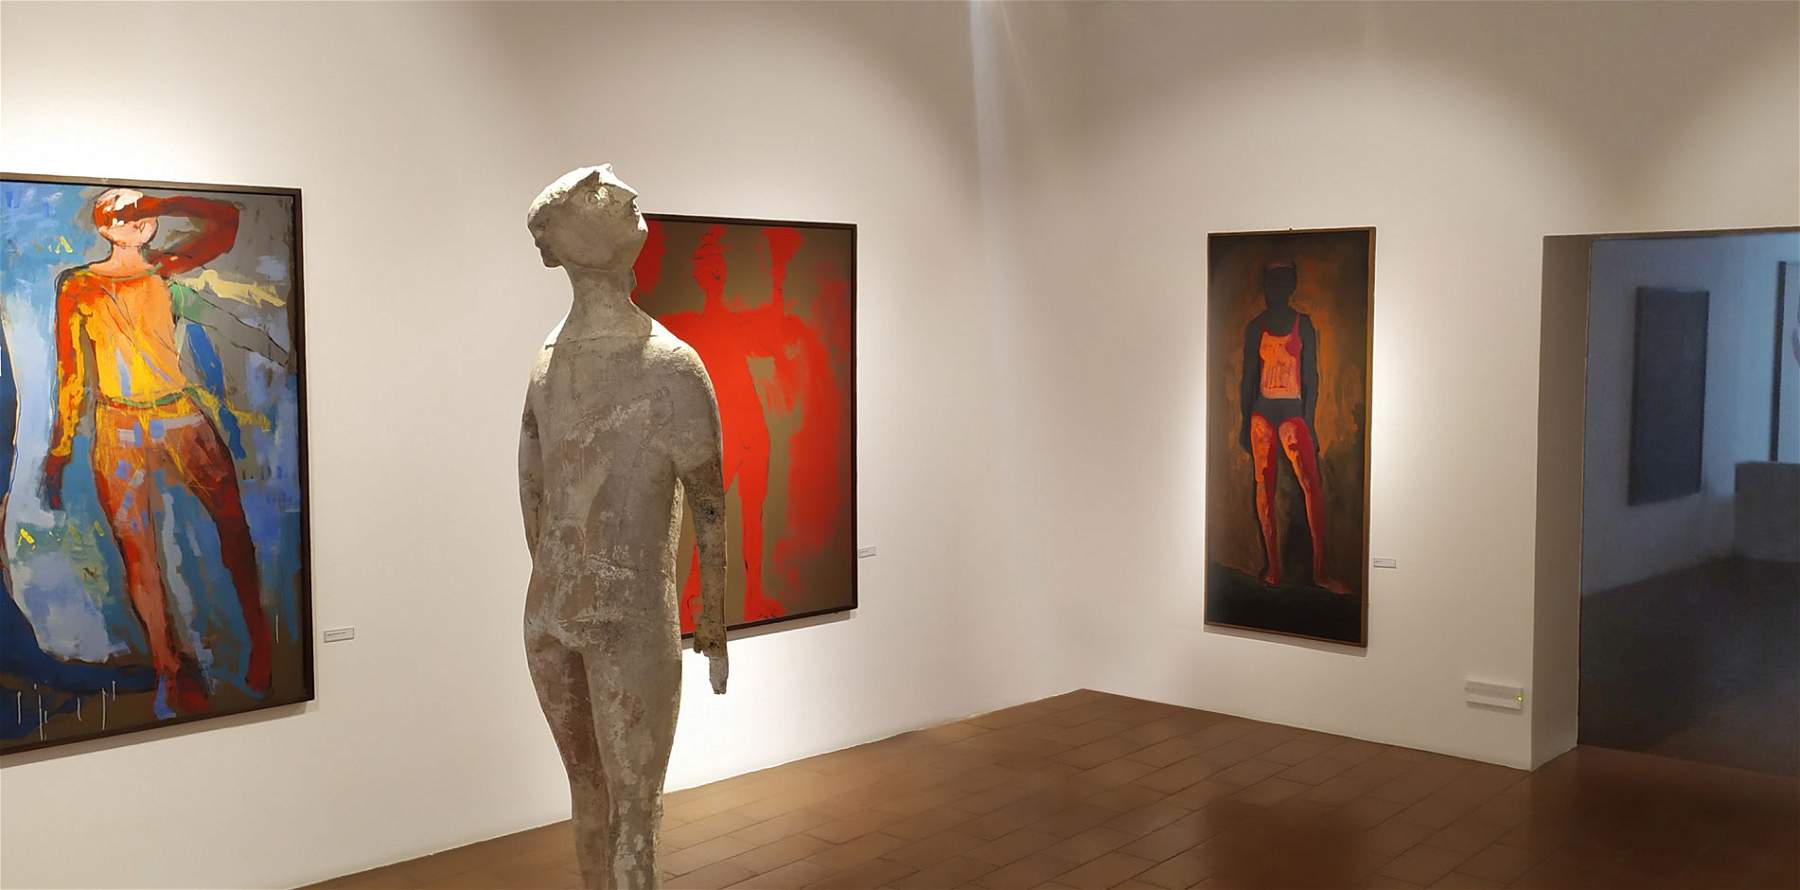 Will Marino Marini's works leave Pistoia? Council of State agrees with the foundation